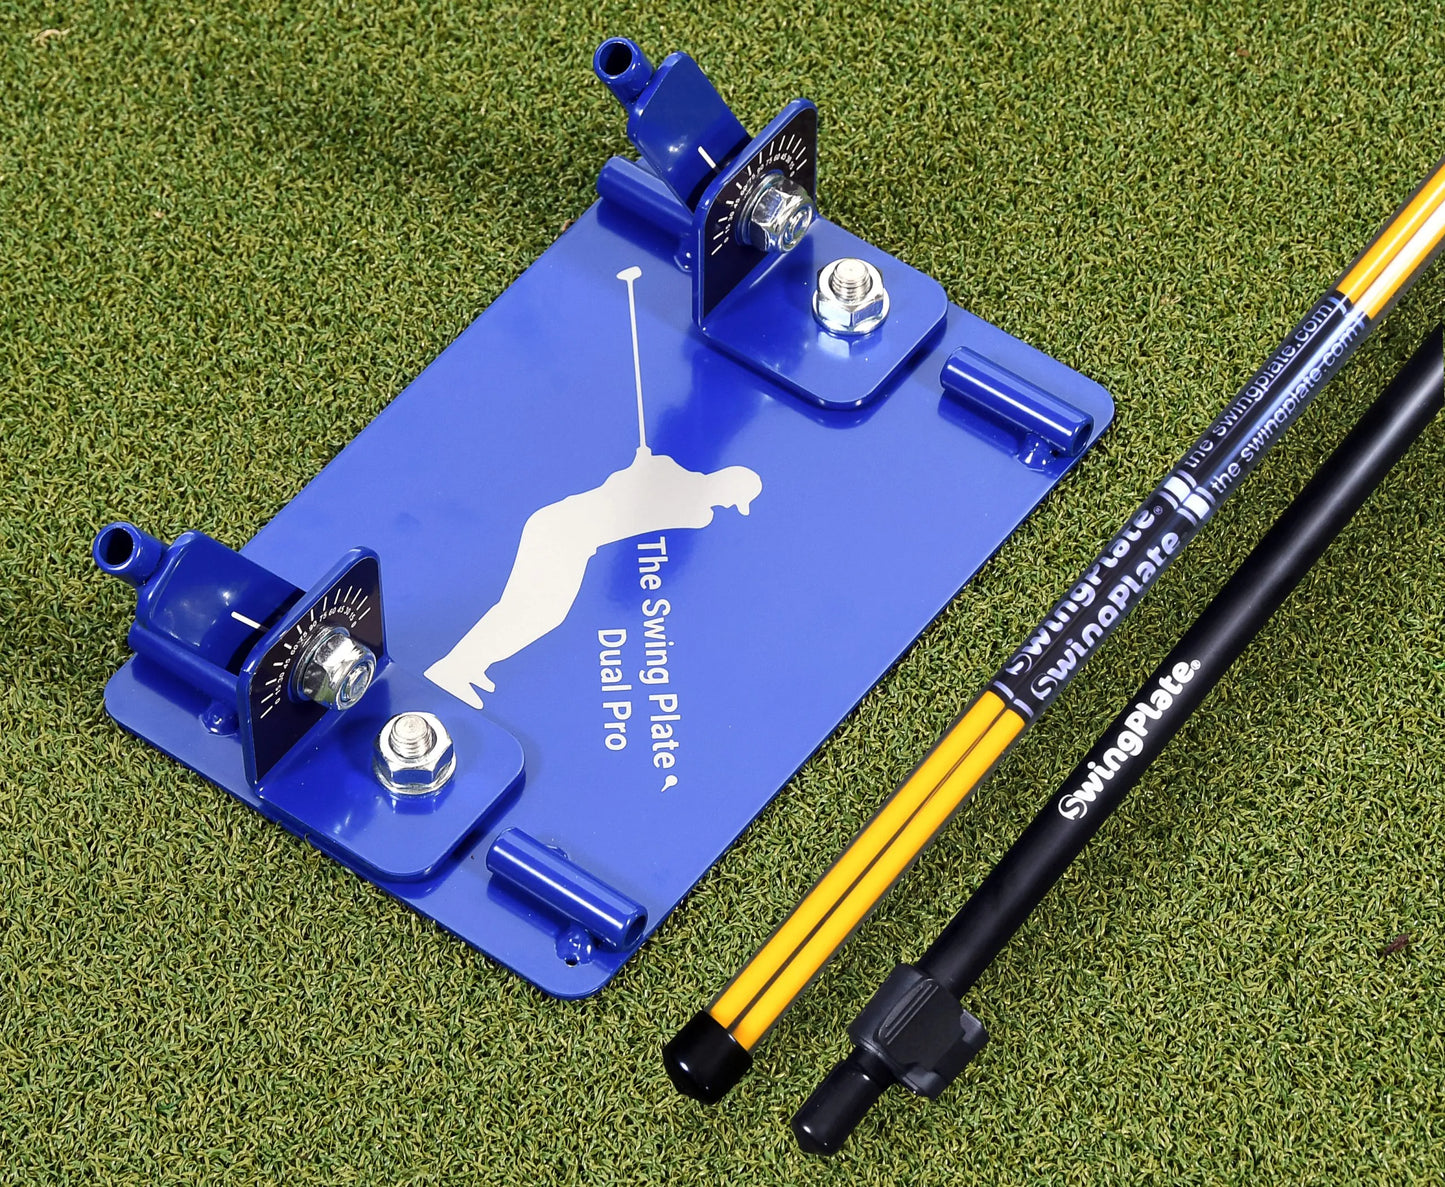 Swing Plate Dual Golf Swing Trainer Pro Bundle (w/ 2 Alignment Sticks & Extension Pole)